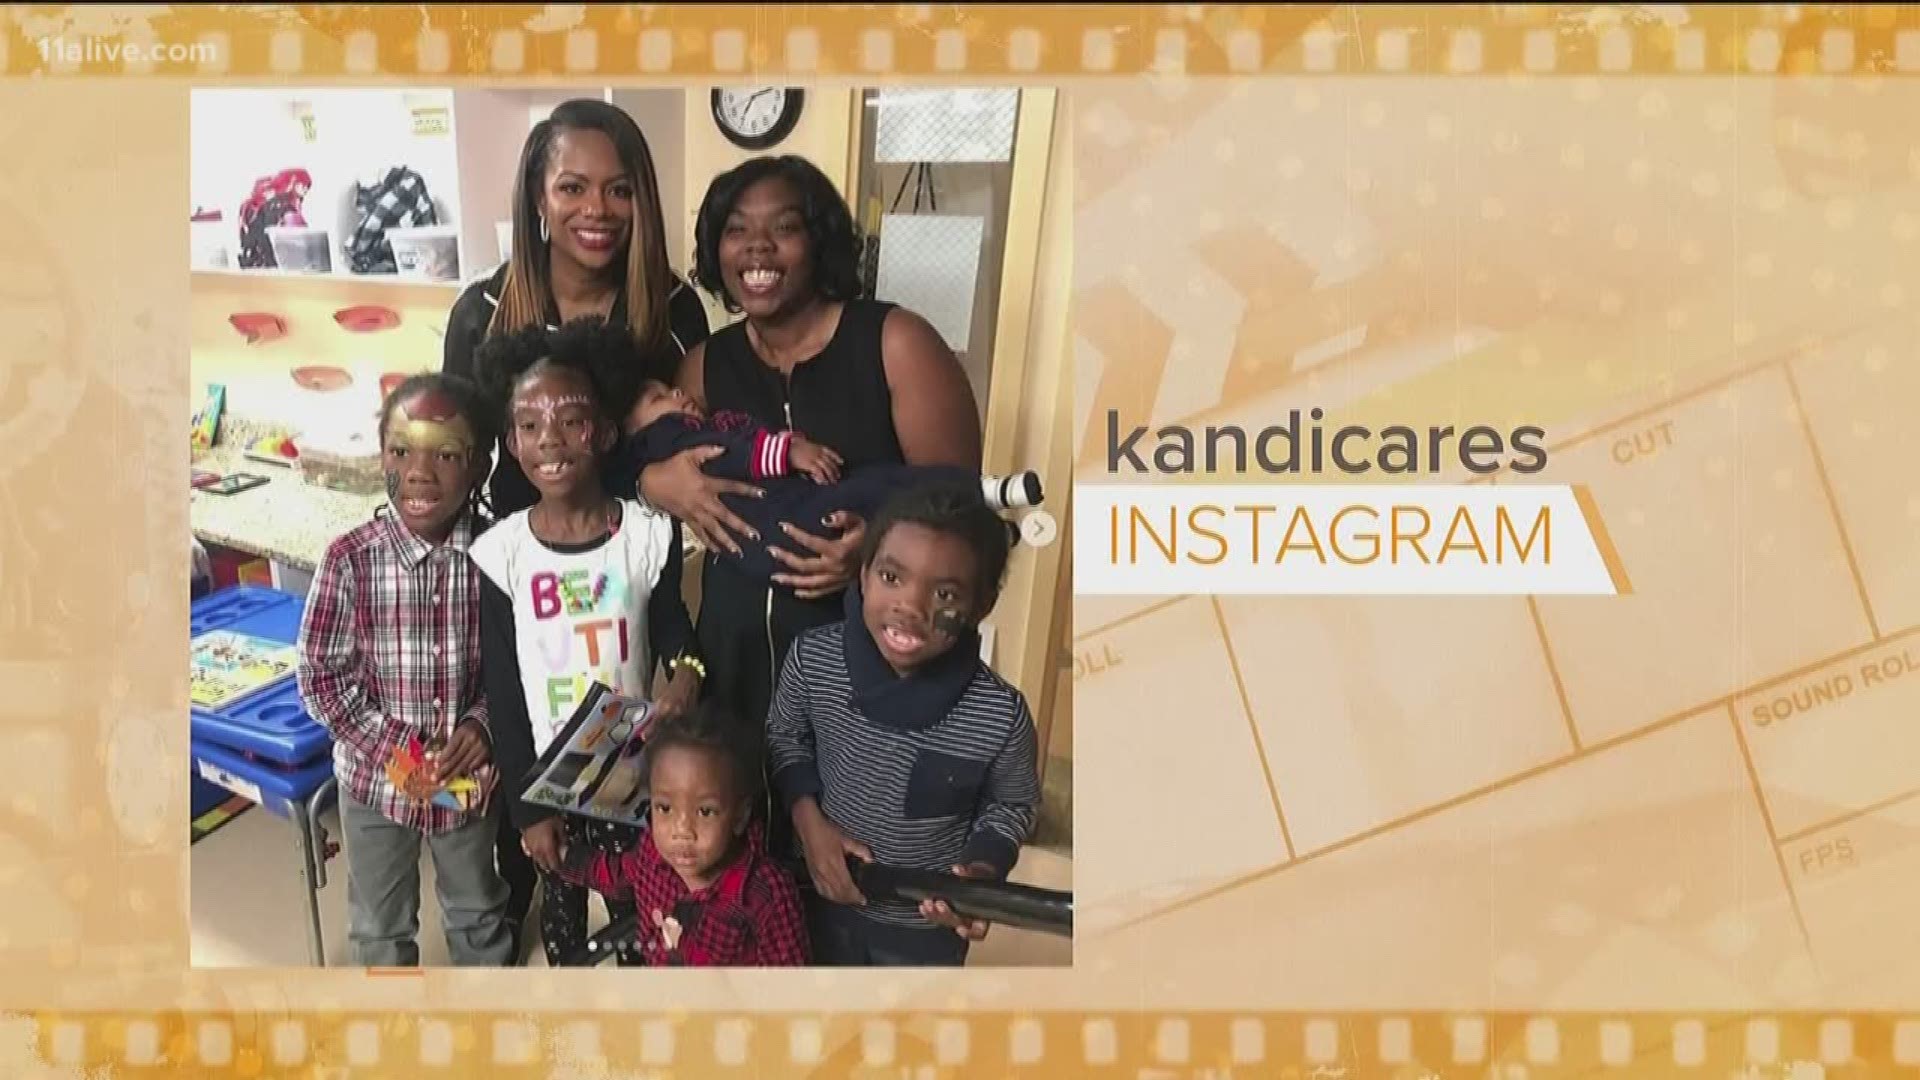 It was part of KandiCares which aims to support single parents during the holidays.